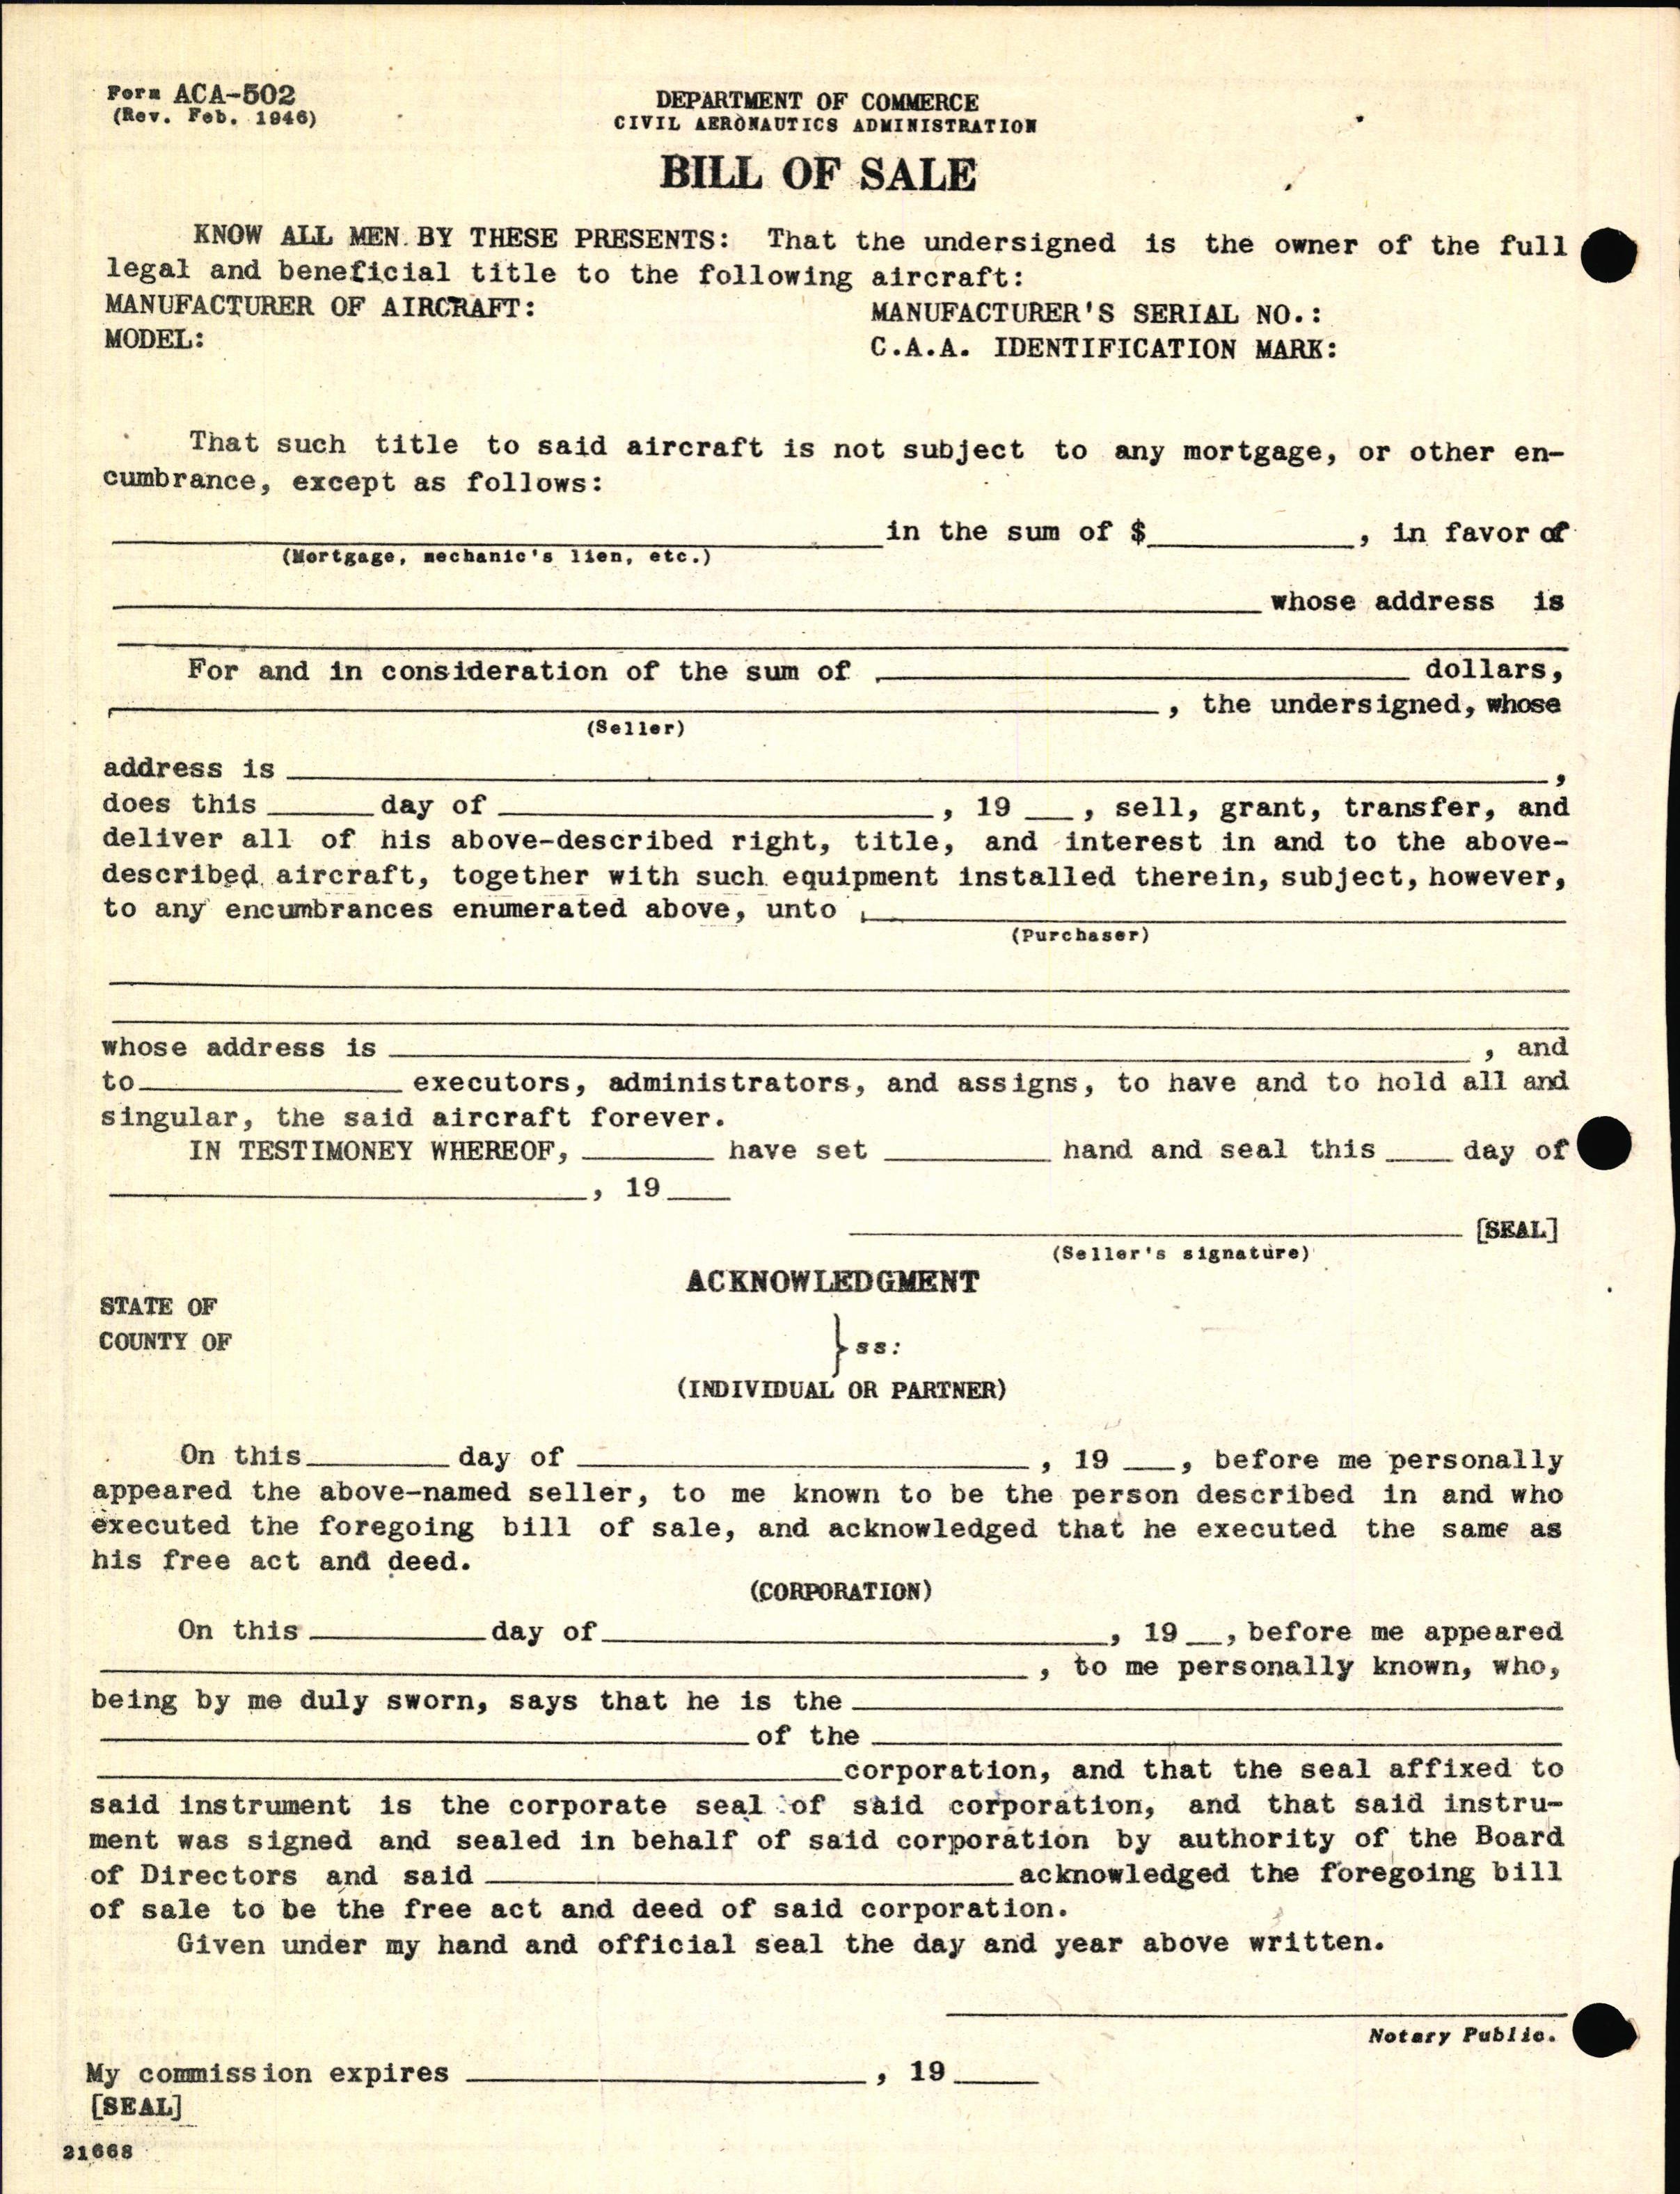 Sample page 2 from AirCorps Library document: Technical Information for Serial Number 2059